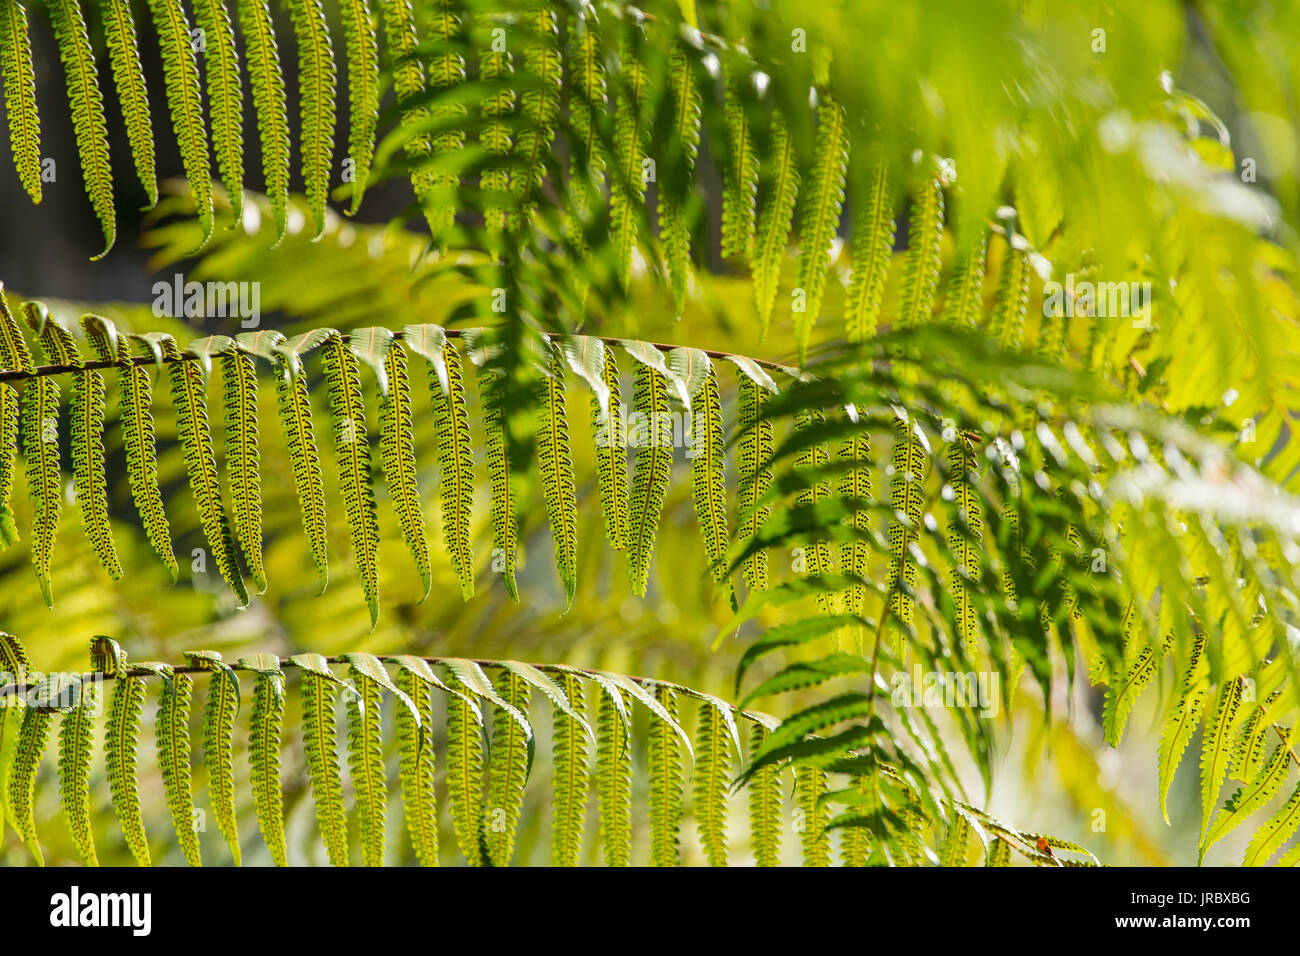 Fresh young green fern leaves close-up Stock Photo